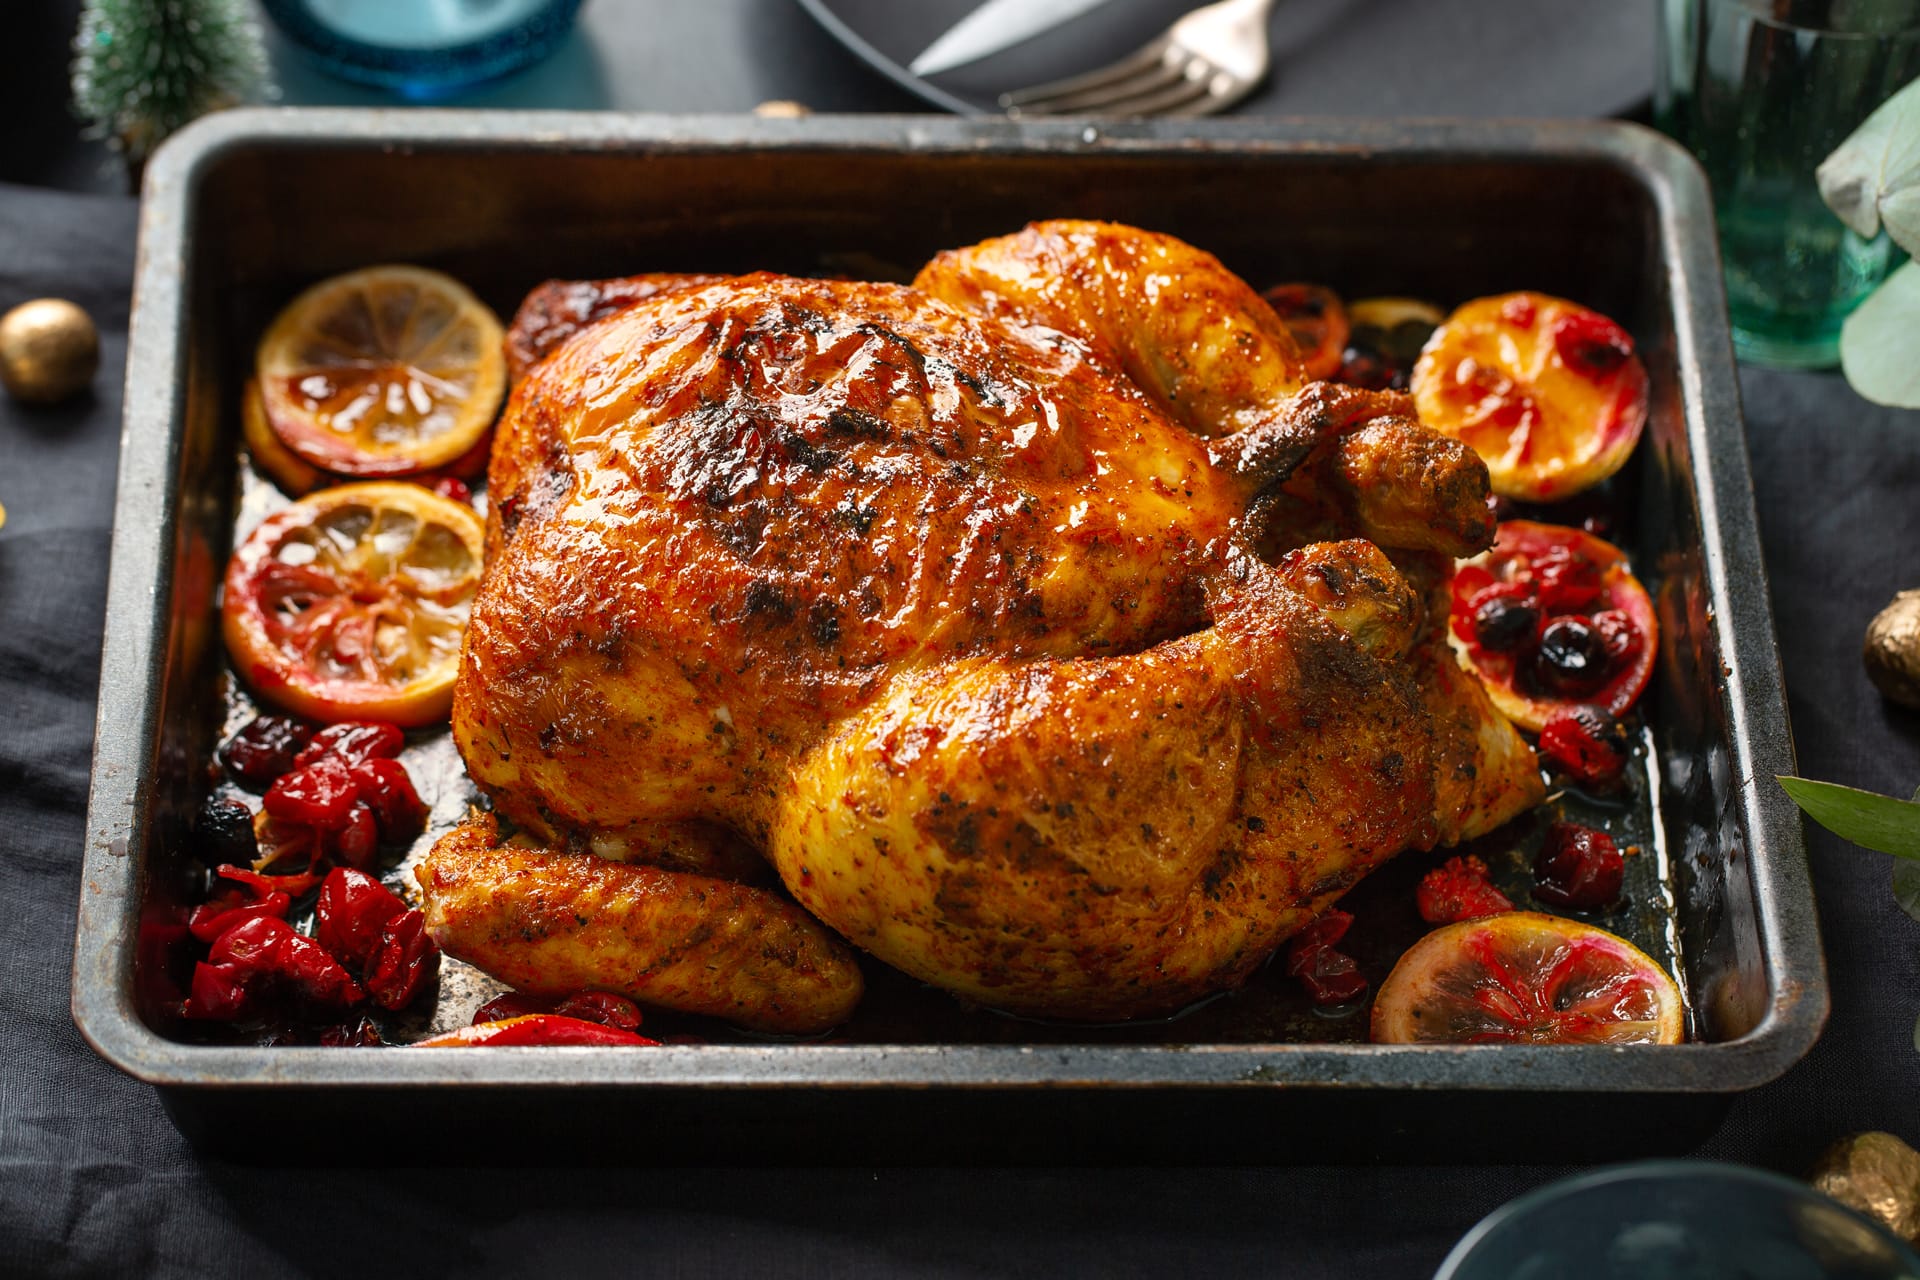 Whole chicken with oranges cranberries oven form closeup nice image